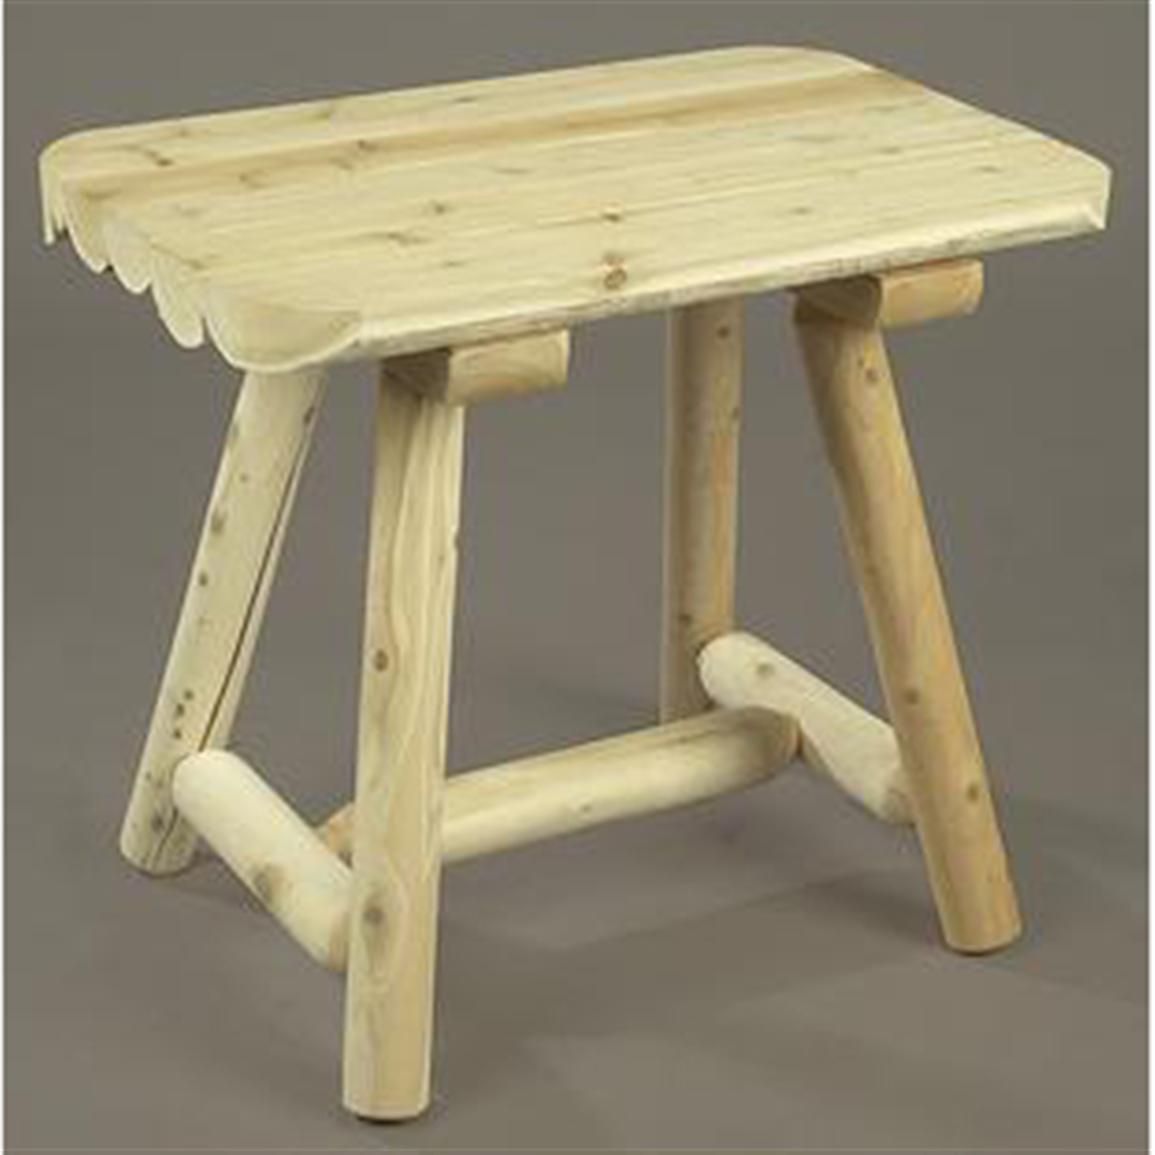 Rustic Natural Cedar Unfinished End Table – 200459, Patio Furniture At Inside Natural Wood Outdoor Side Tables (View 3 of 15)